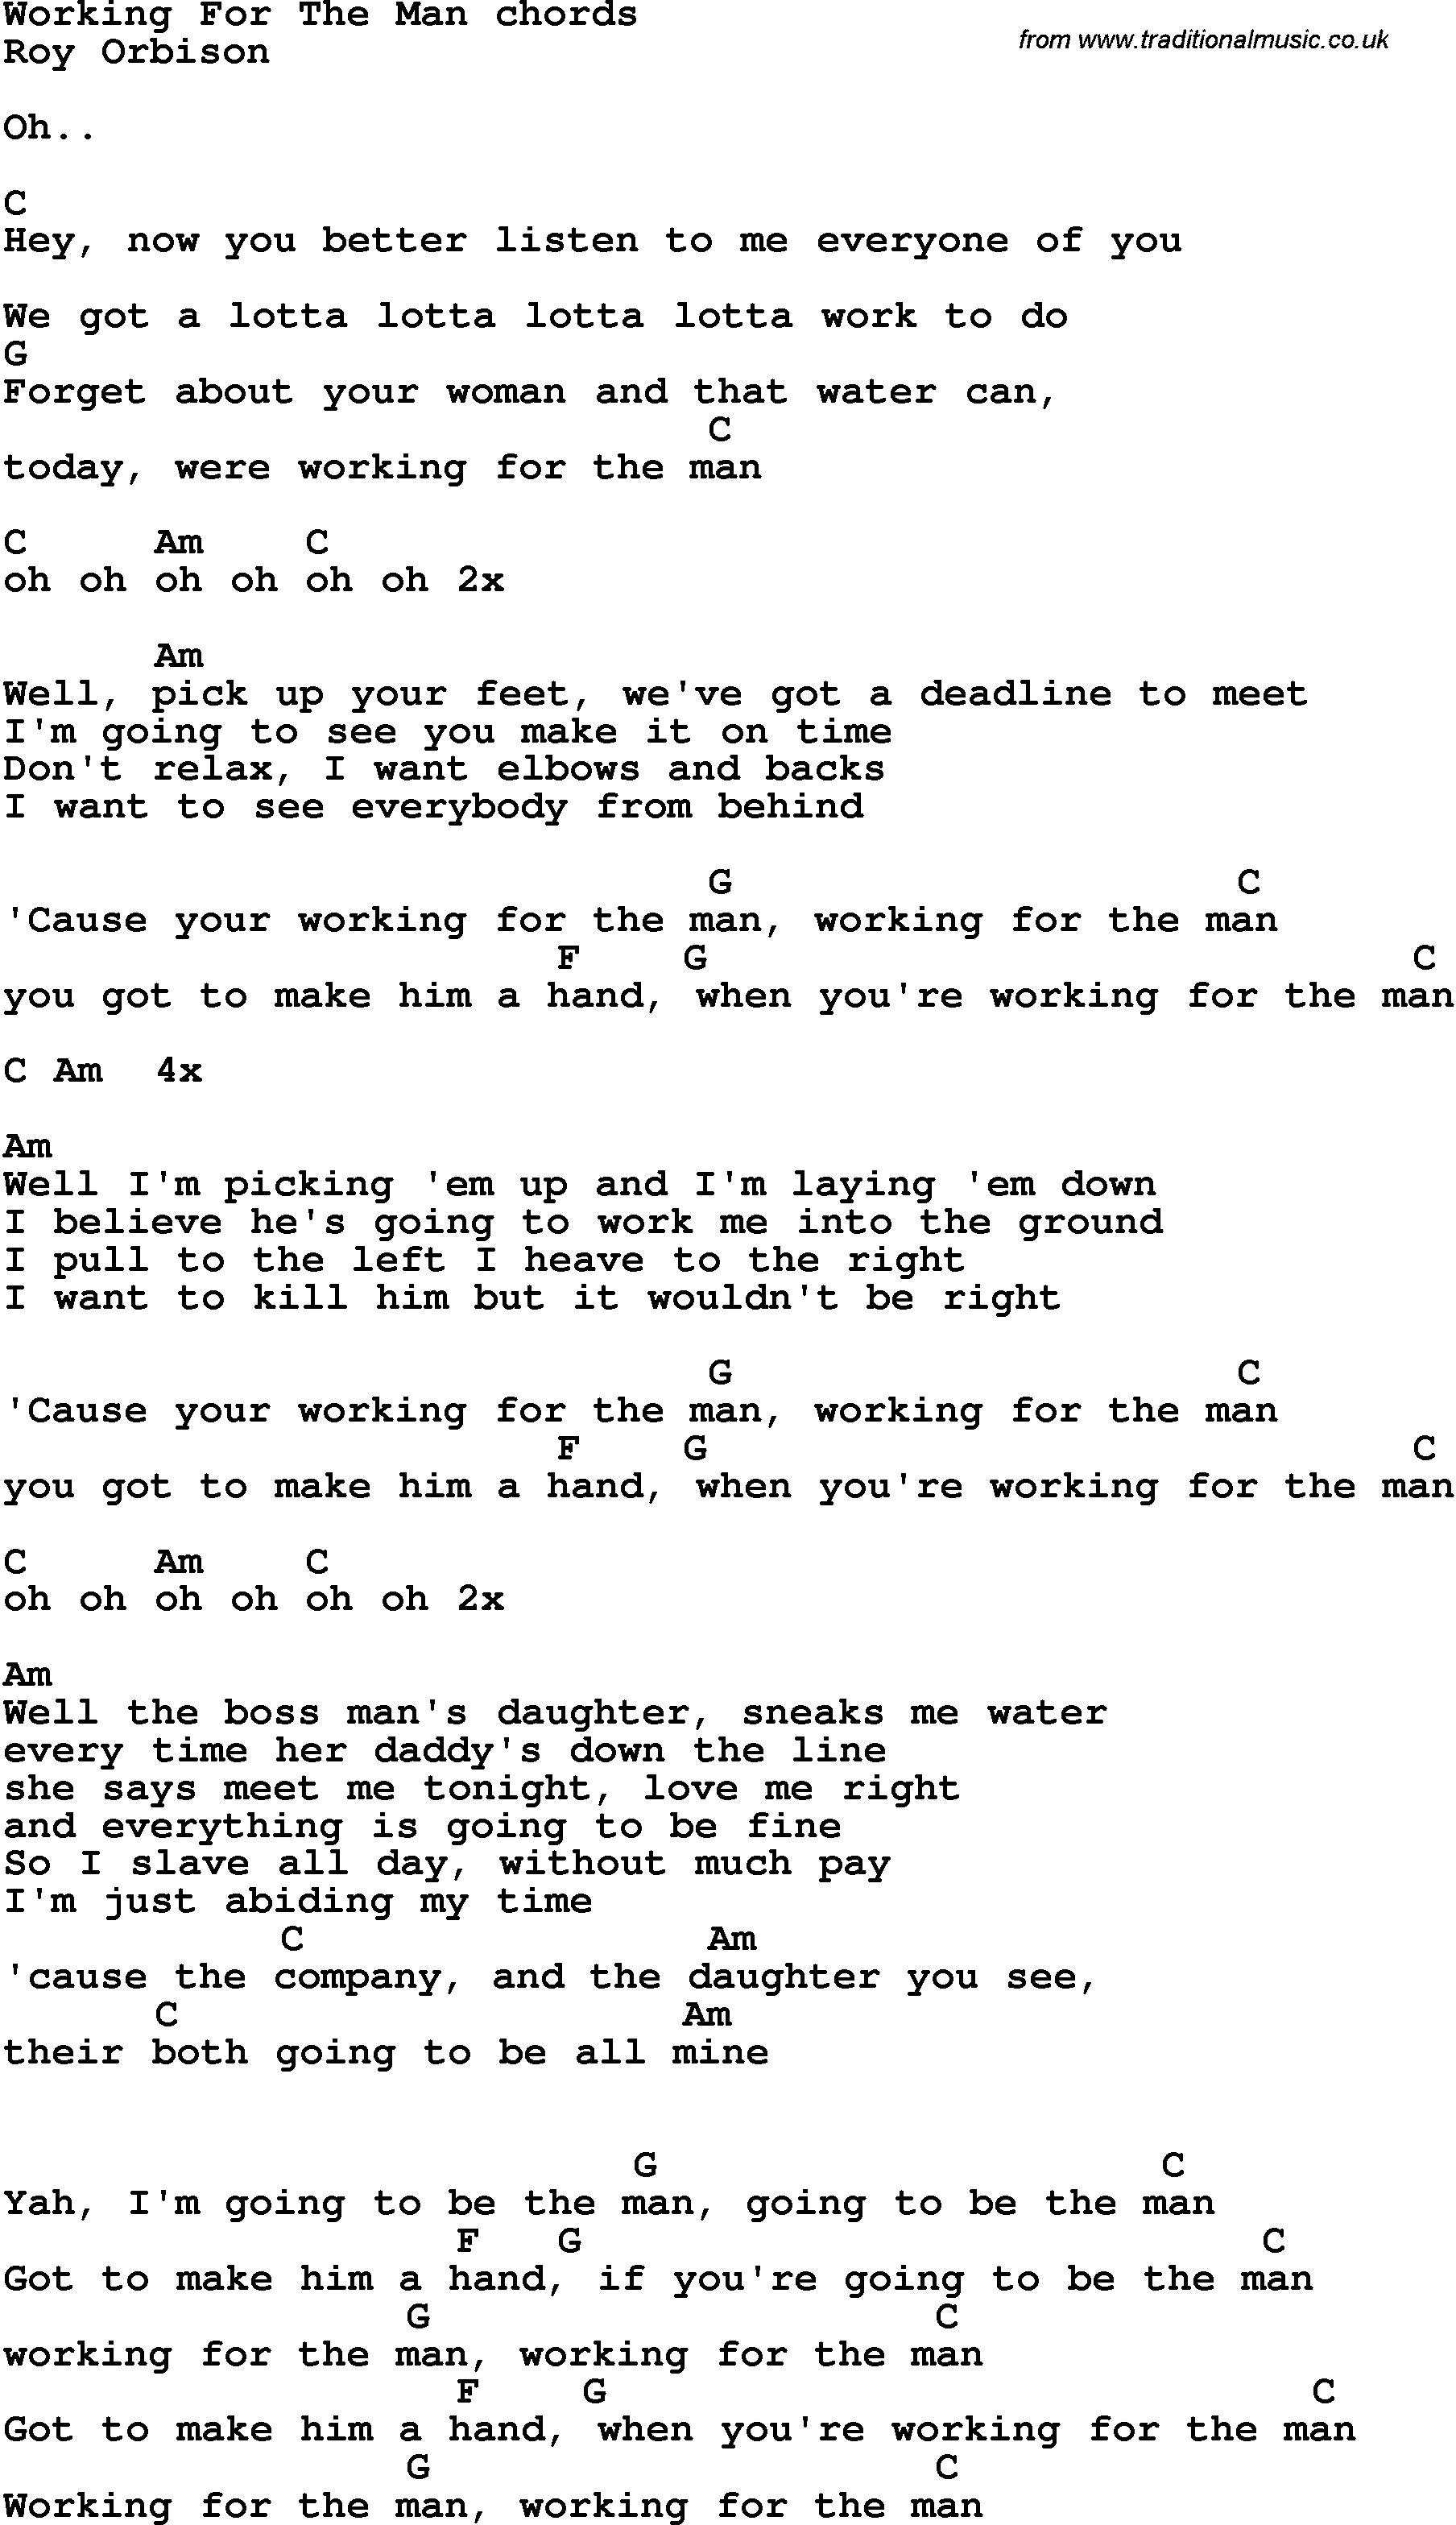 Song Lyrics with guitar chords for Working For The Man